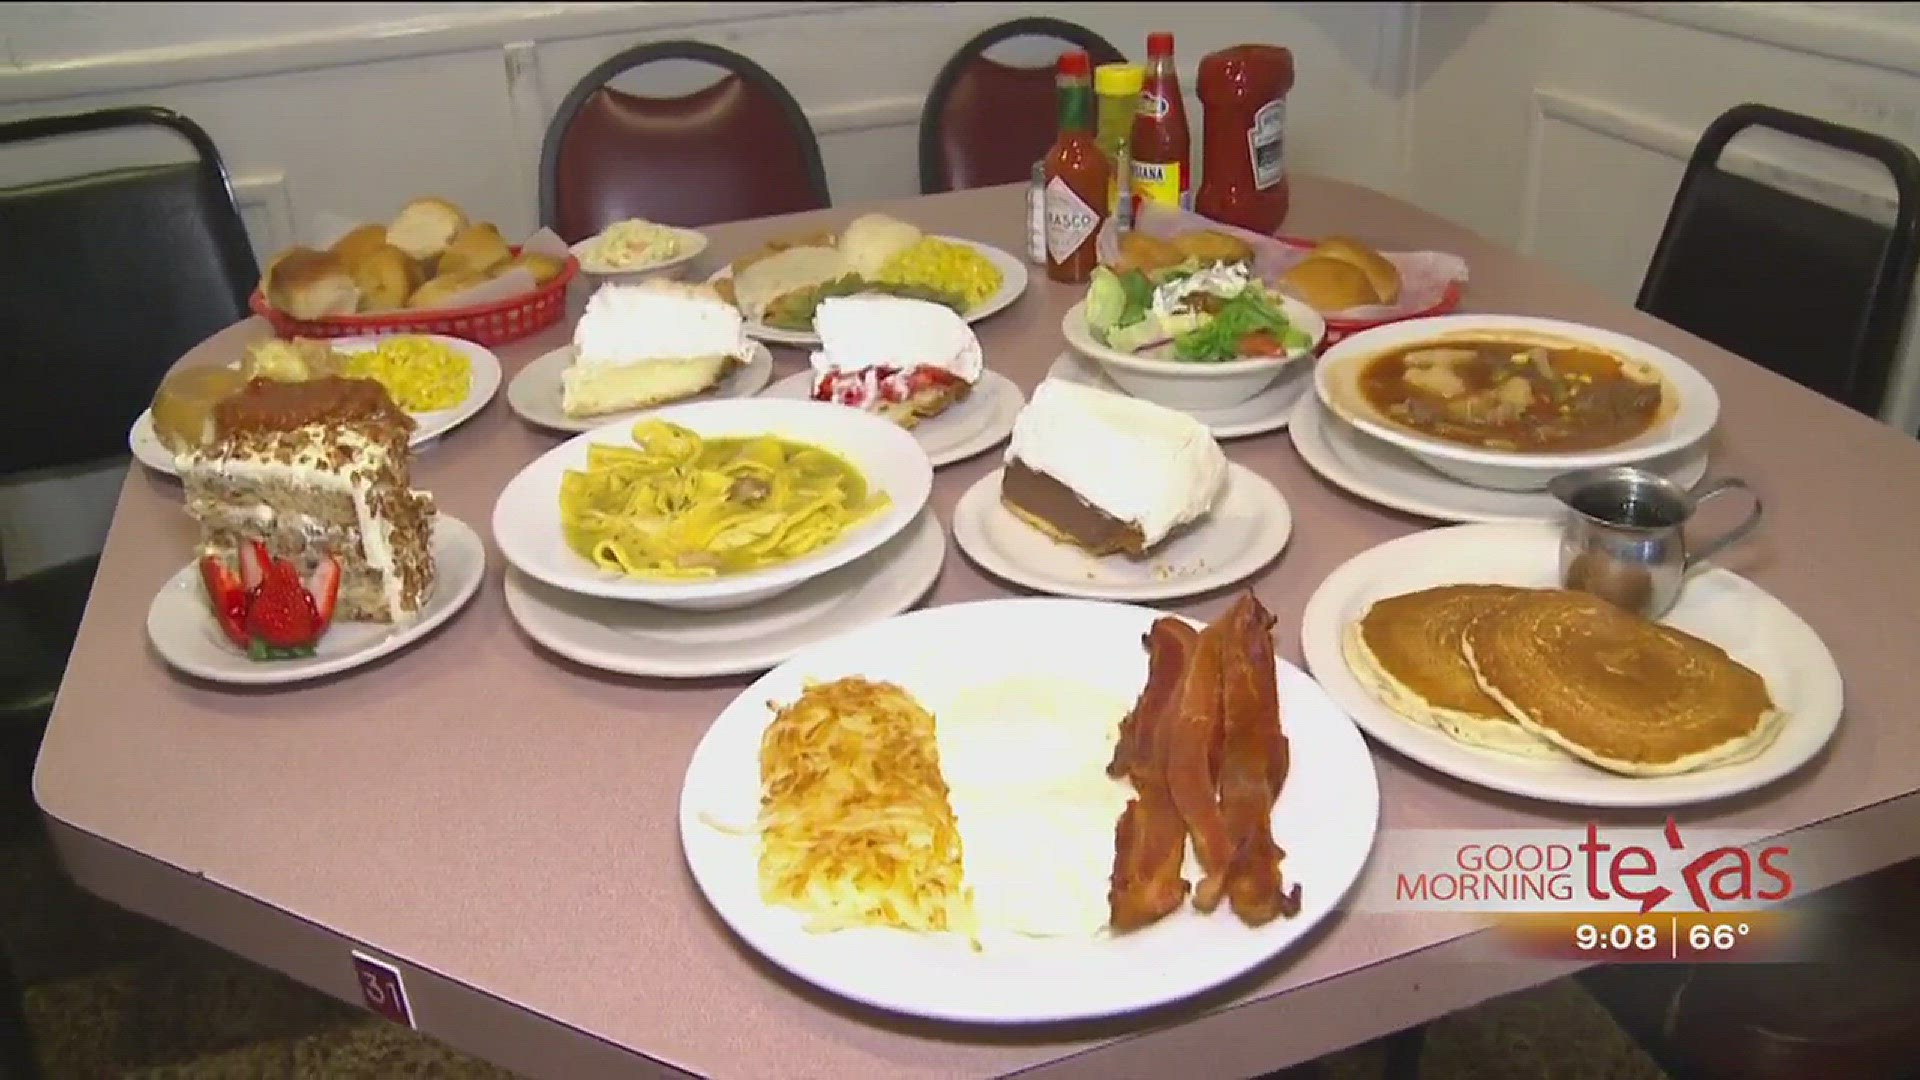 The Mama's Daughter's Diner is run by three generations of moms.